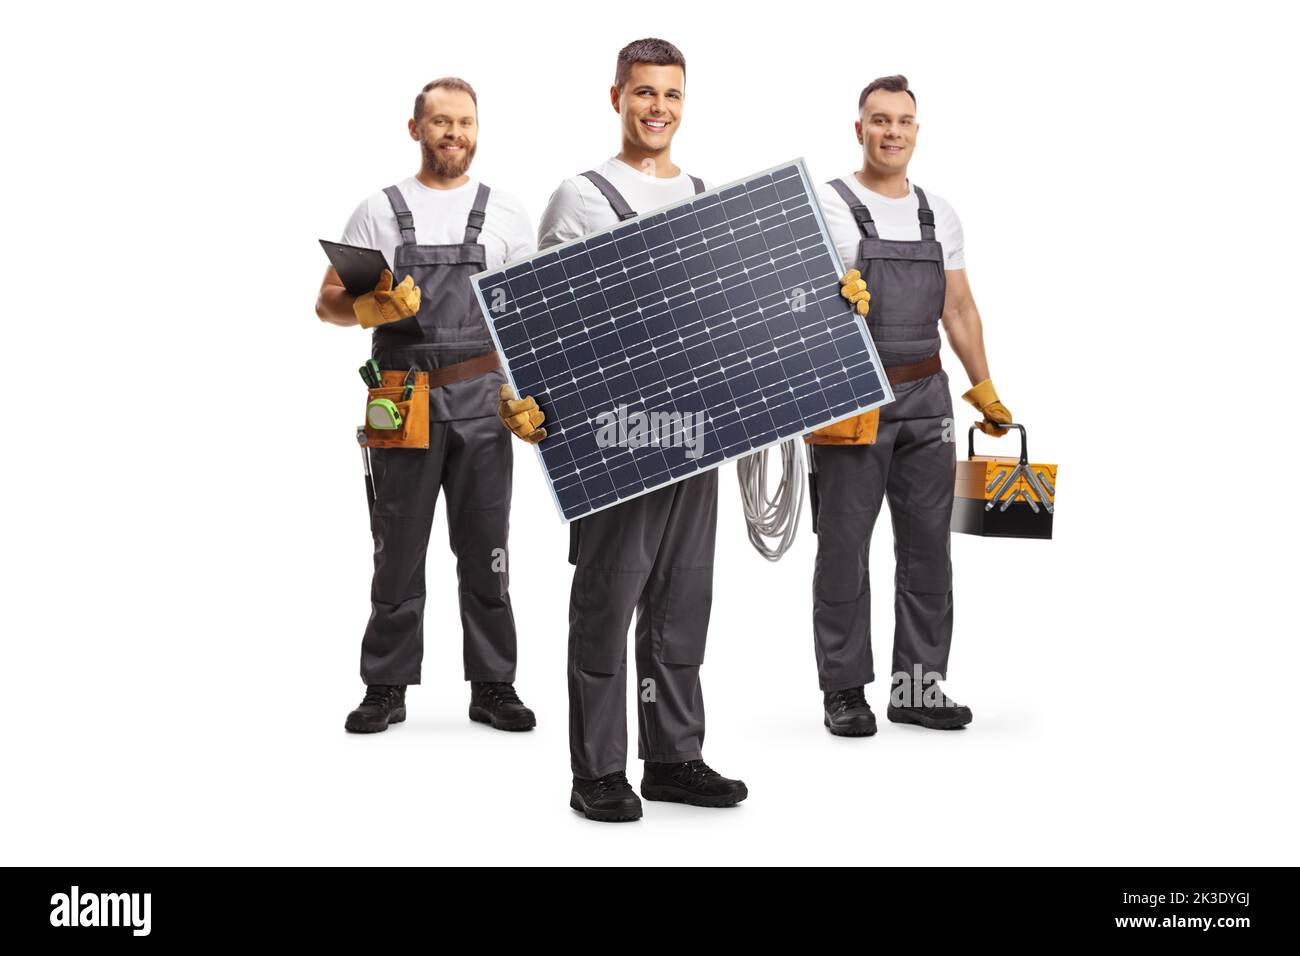 Team of technicians with a solar panel and tools isolated on white background Stock Photo